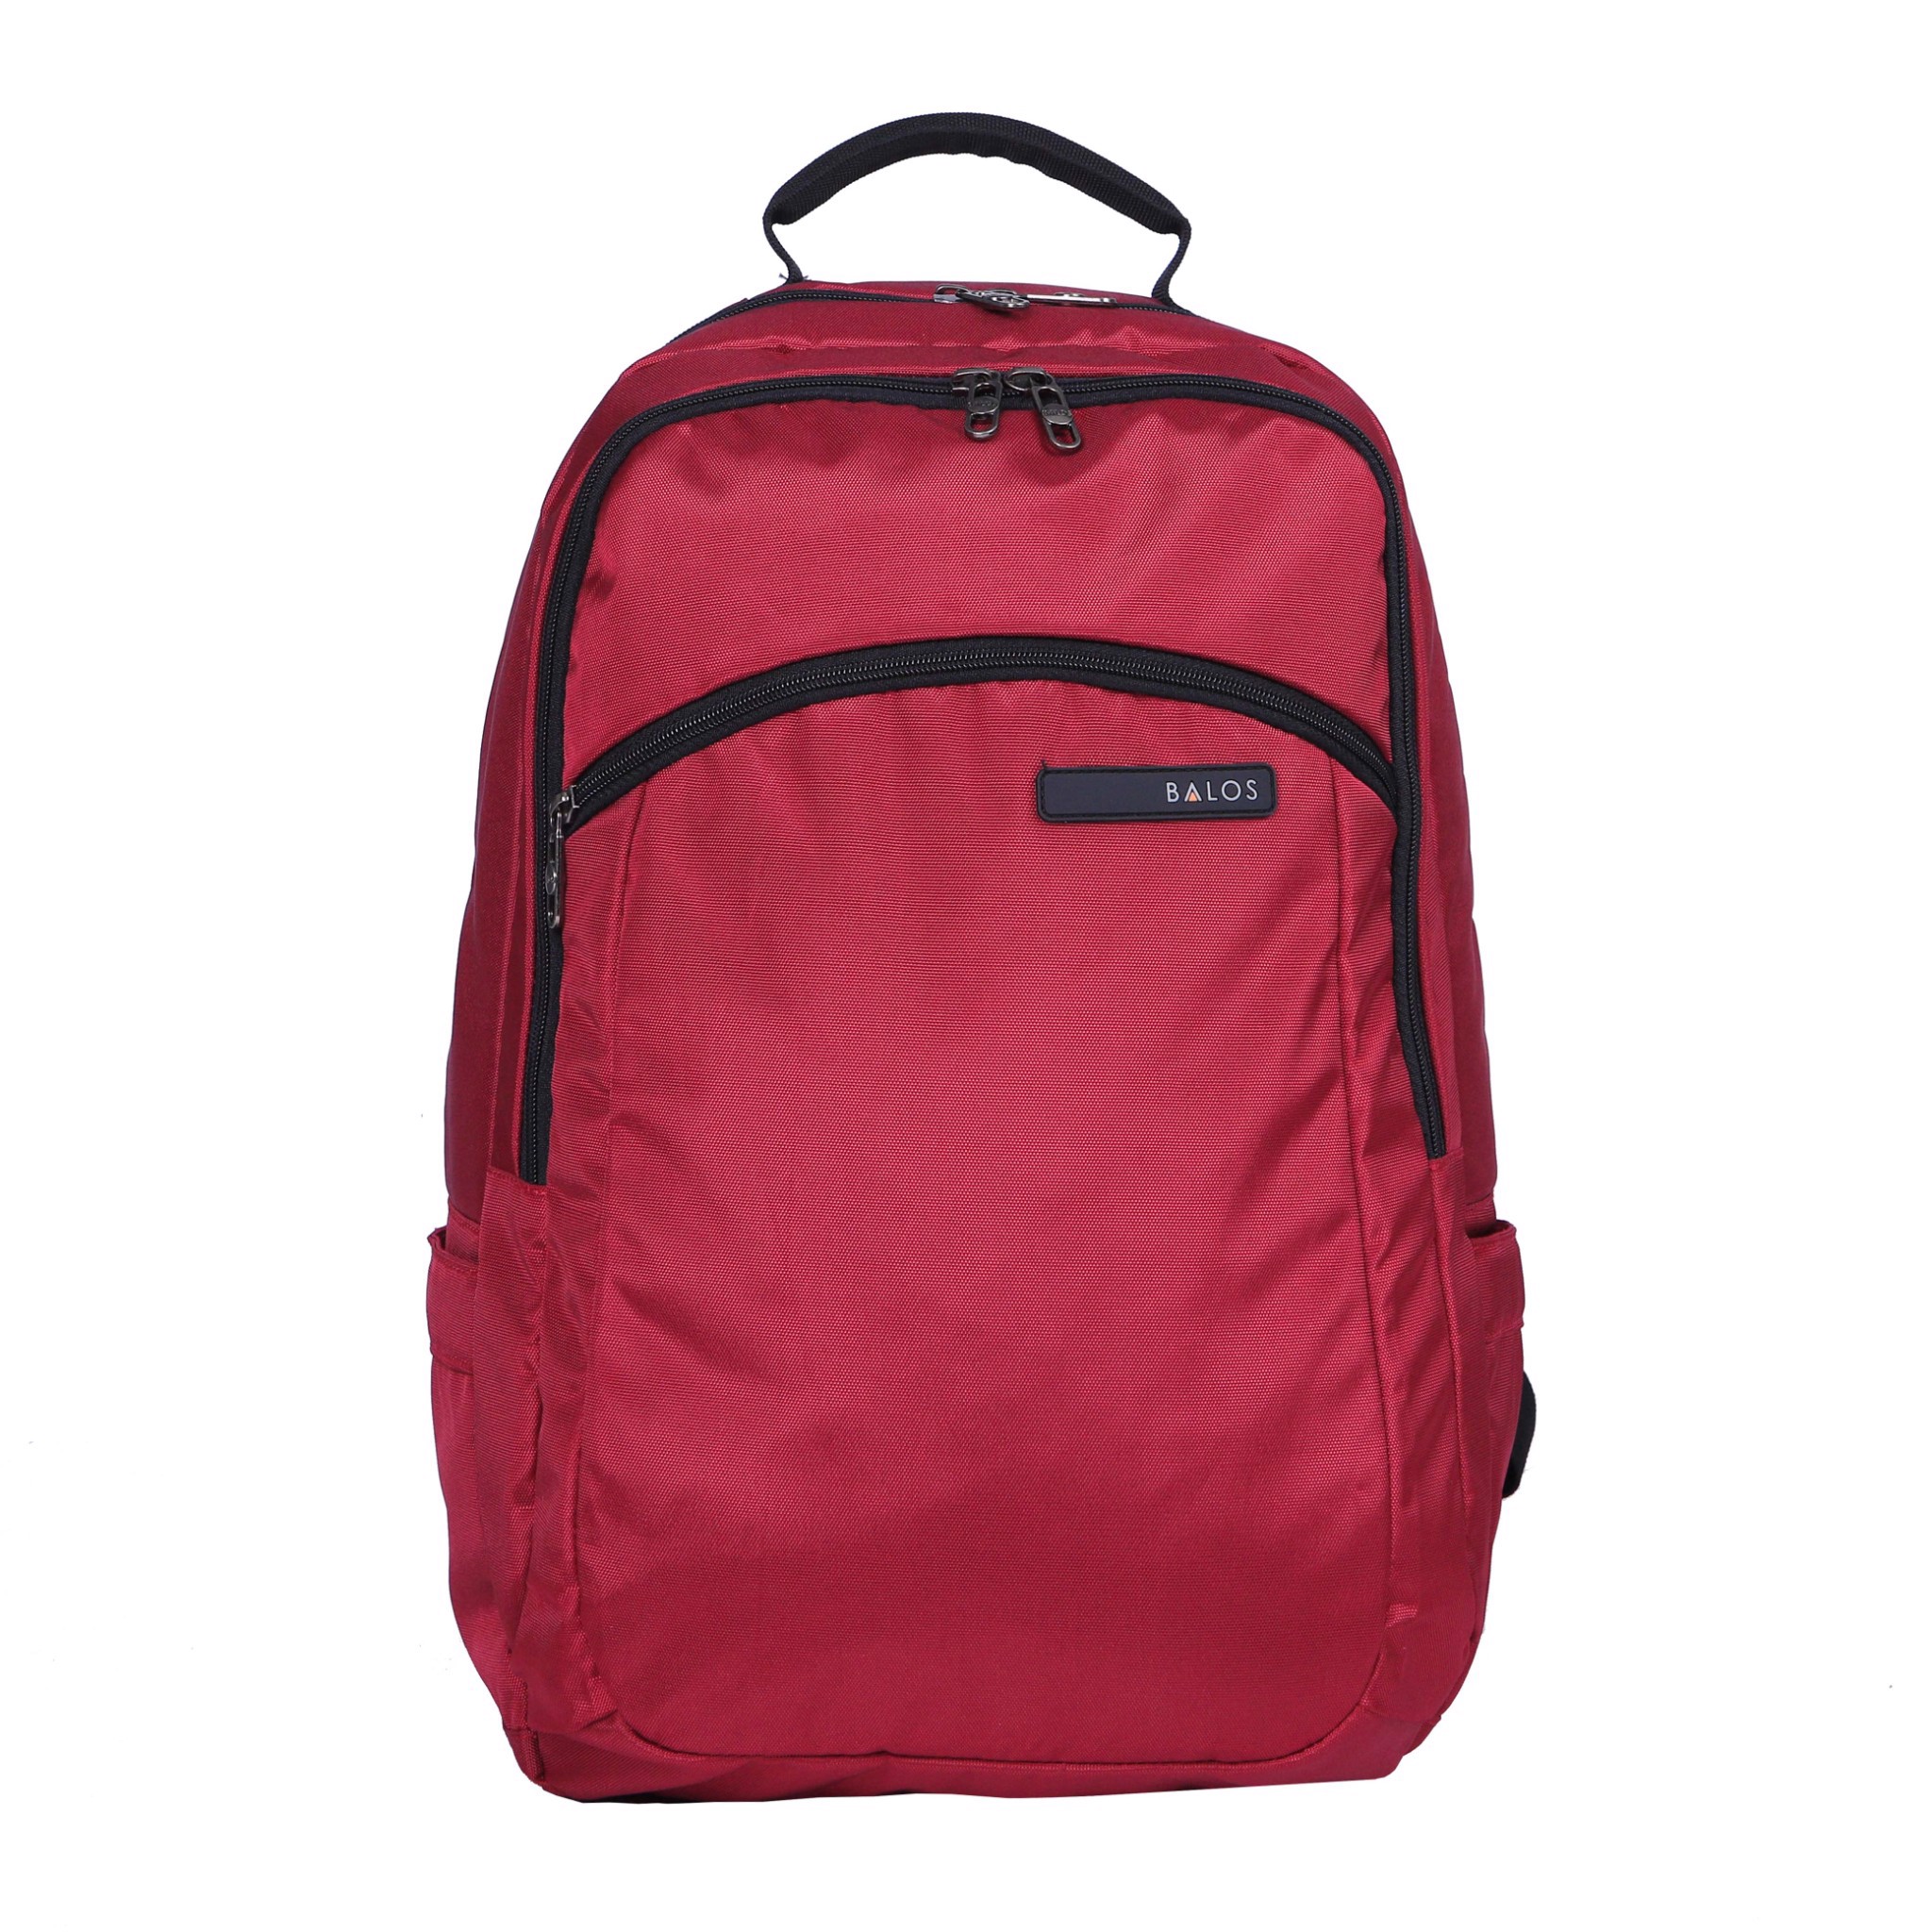 Balos WYNN D.Red Backpack - Balo Laptop 15.6 Inch